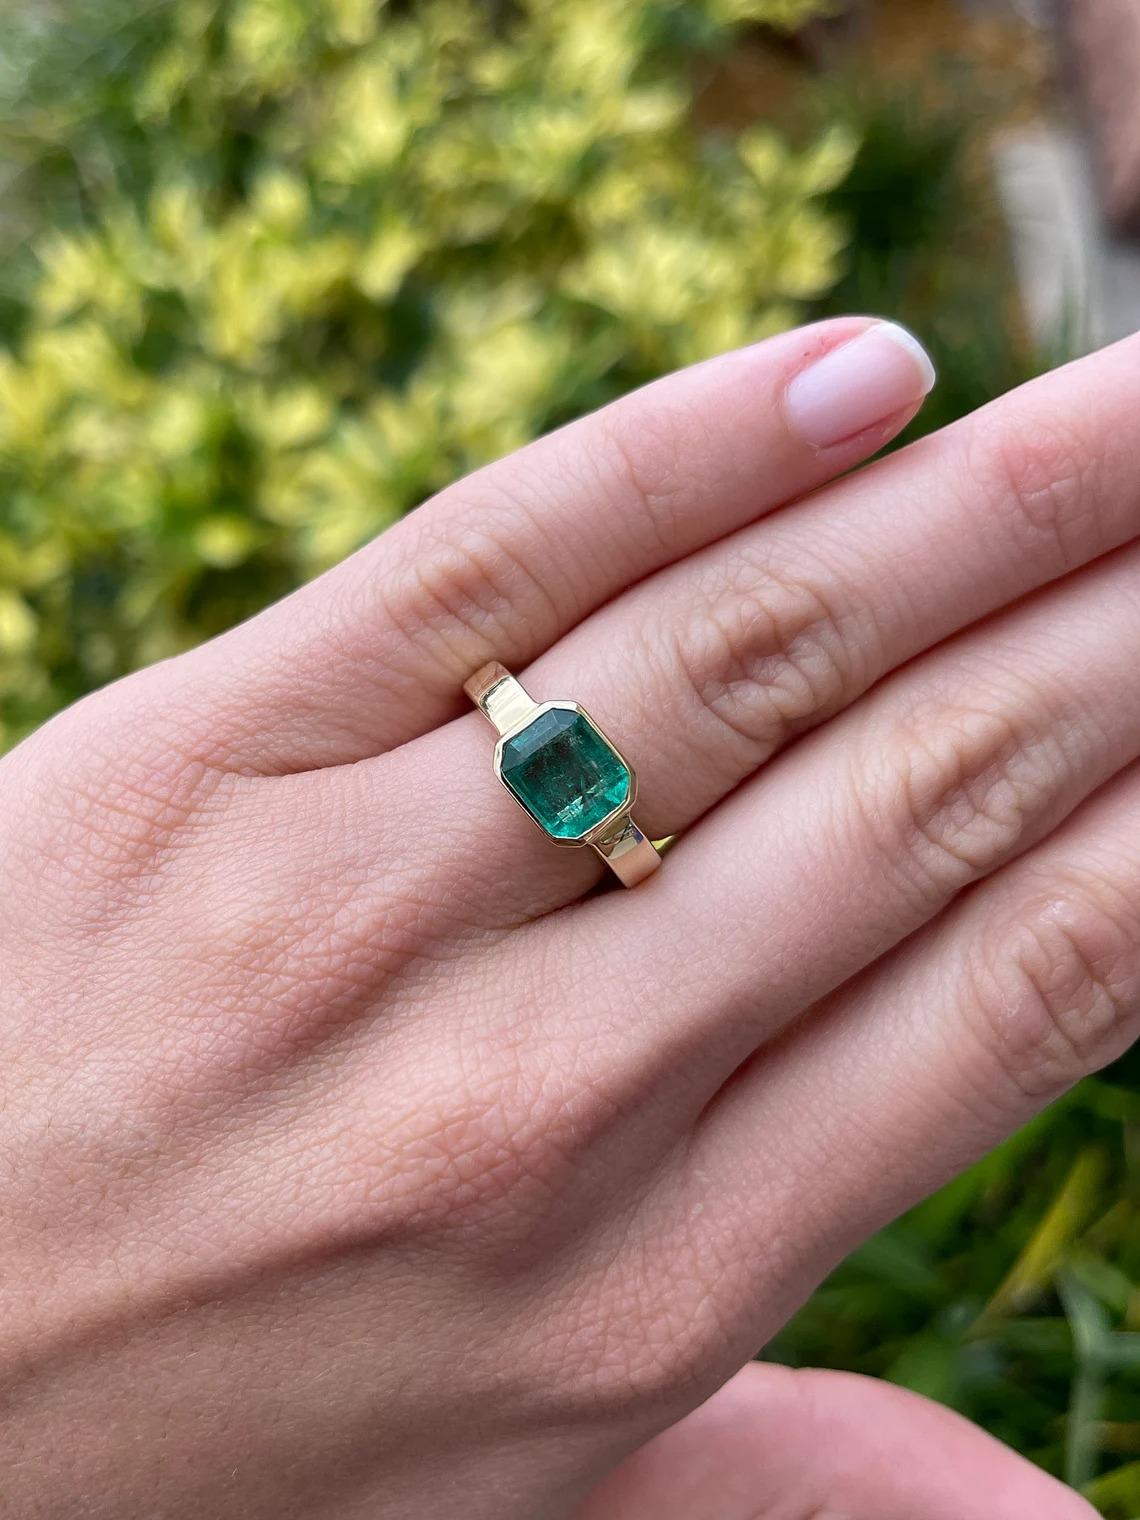 Displayed is a stunning East to West emerald solitaire engagement or right-hand ring in 14K yellow gold. This gorgeous solitaire ring carries a 2.40-carat emerald in a bezel setting. Fully faceted, this gemstone showcases excellent shine and